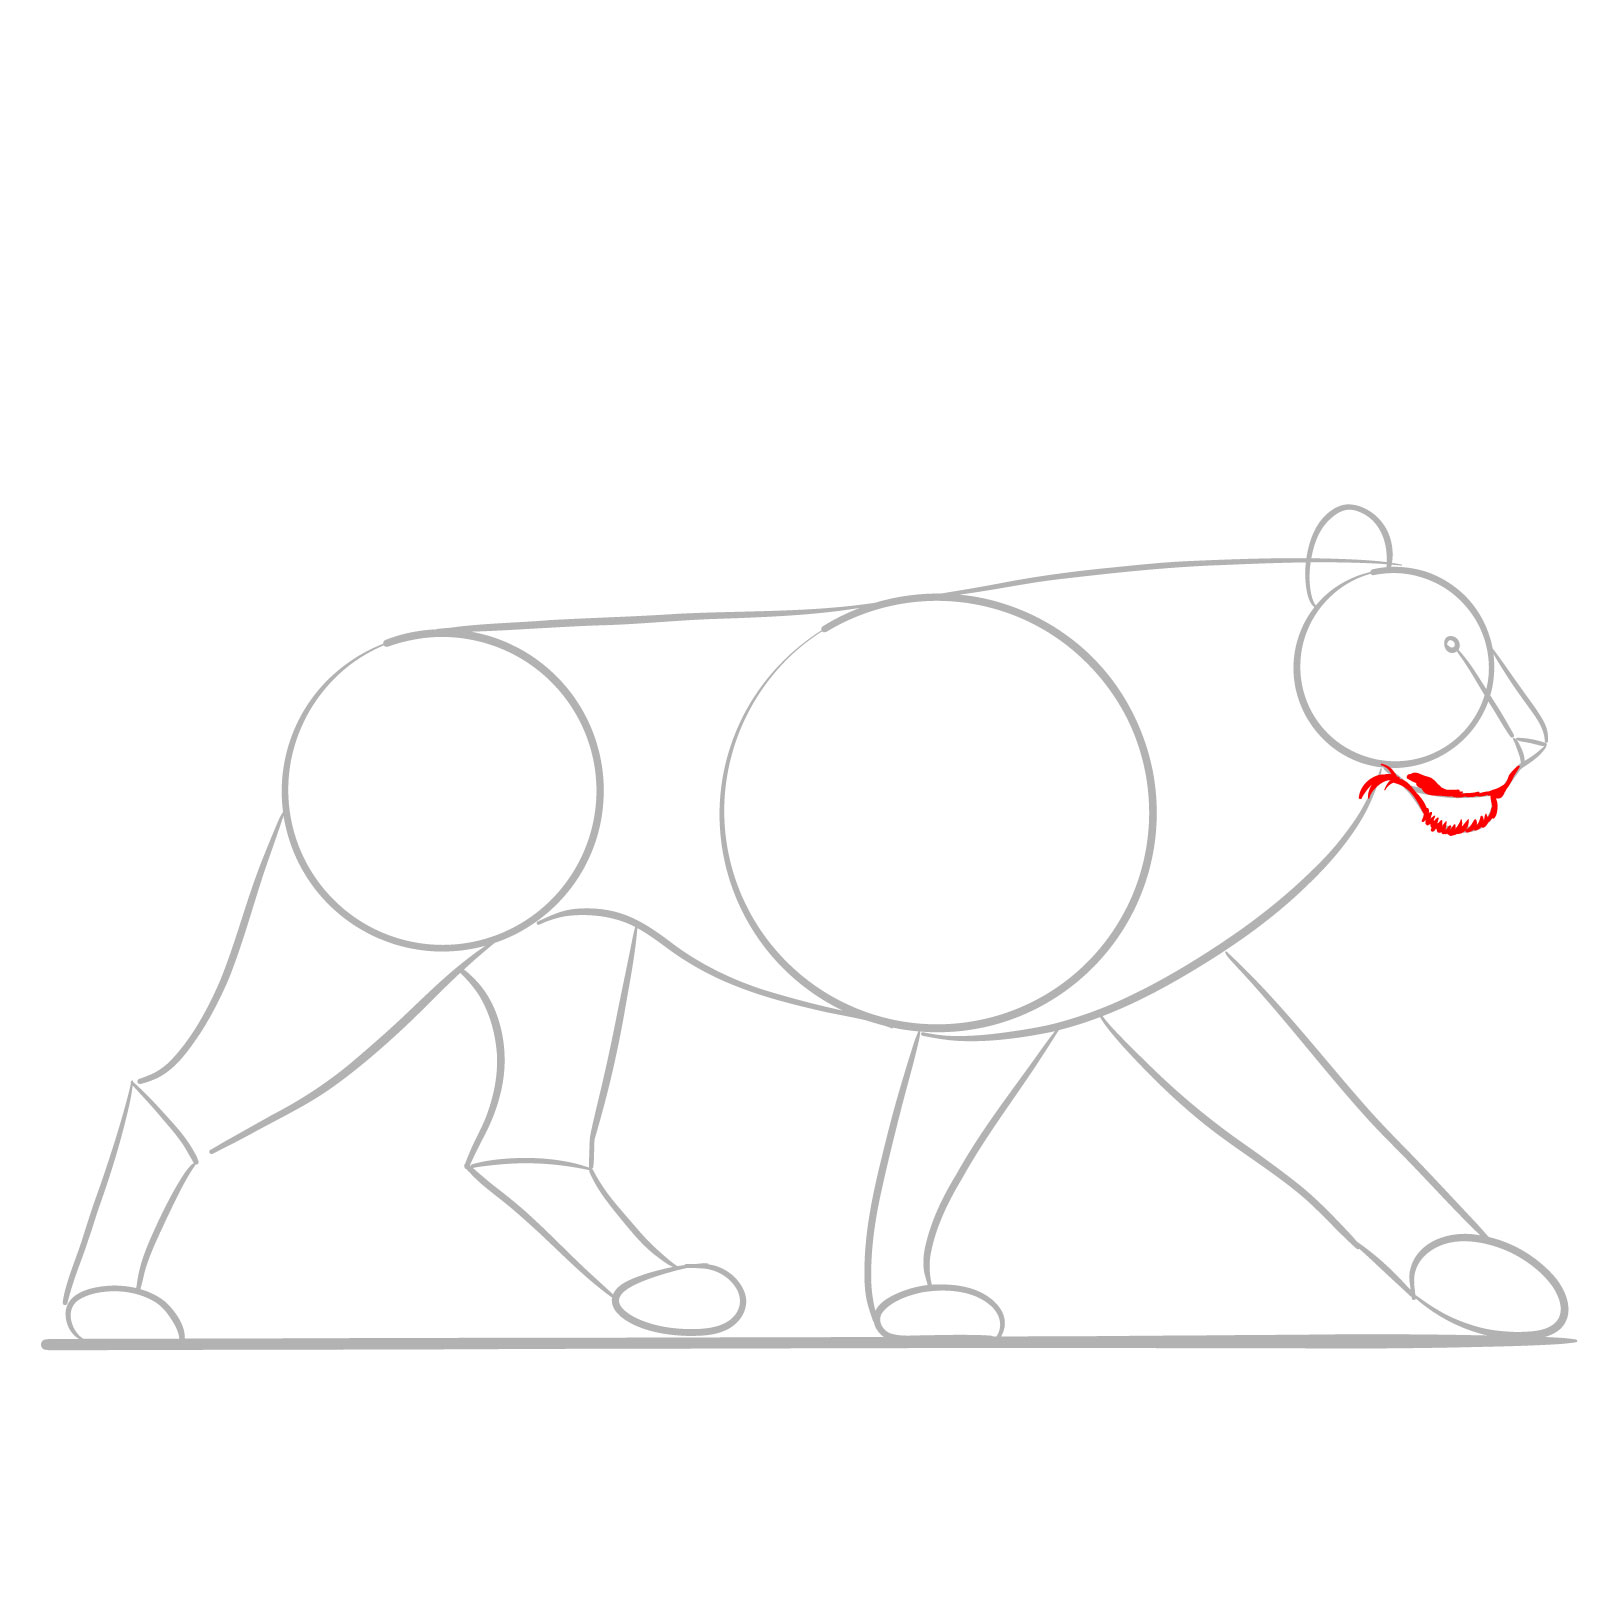 Step 3 in a walking lion drawing guide, shaping the chin and lower jaw - step 03